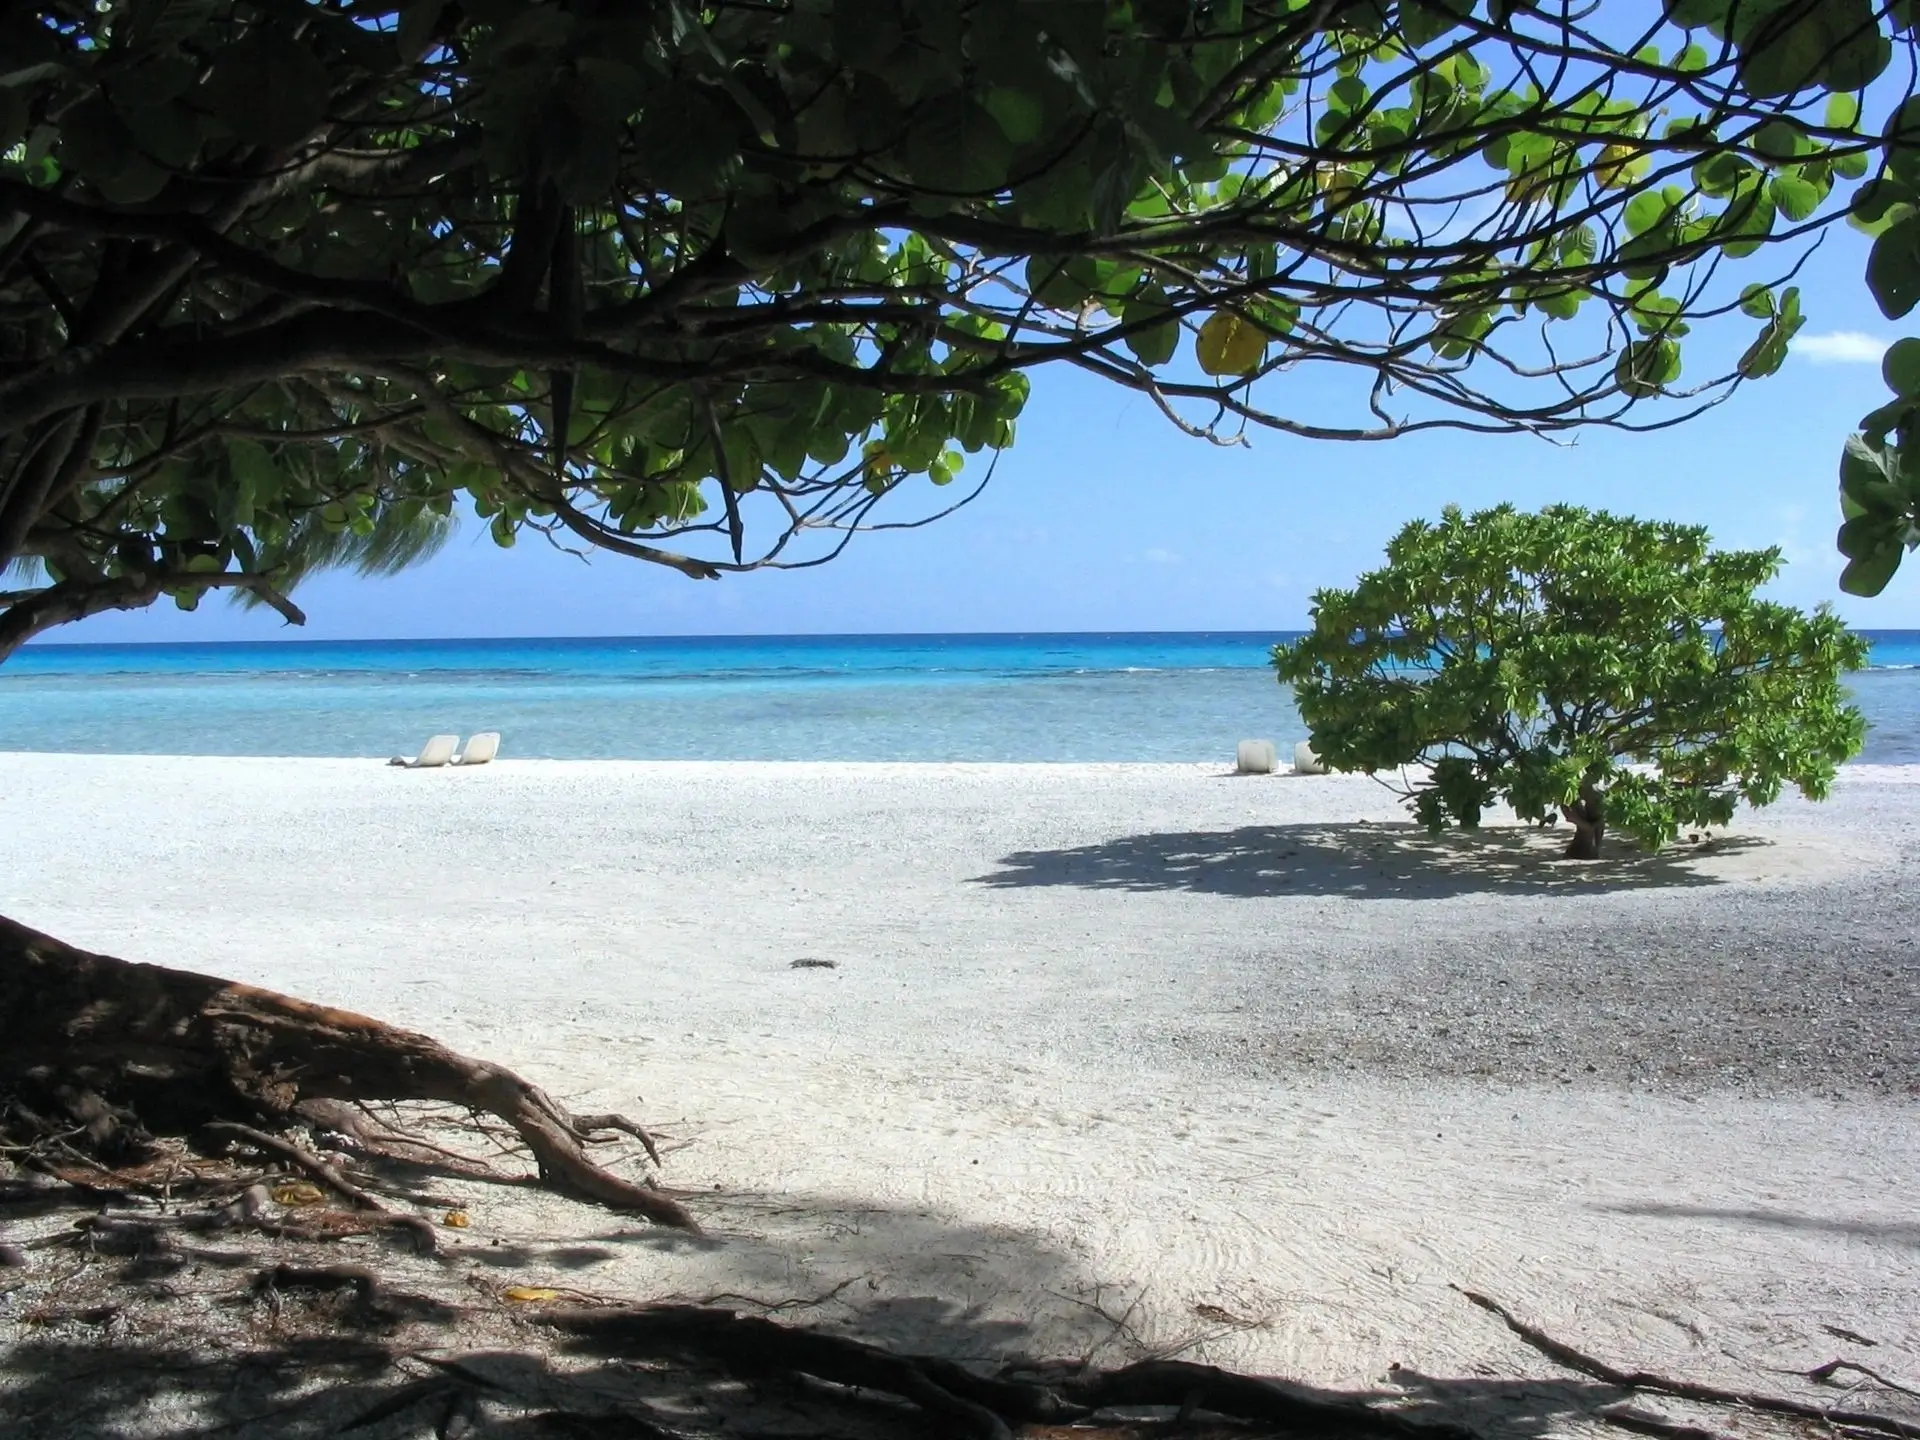 A beach with trees and sand on the shore.